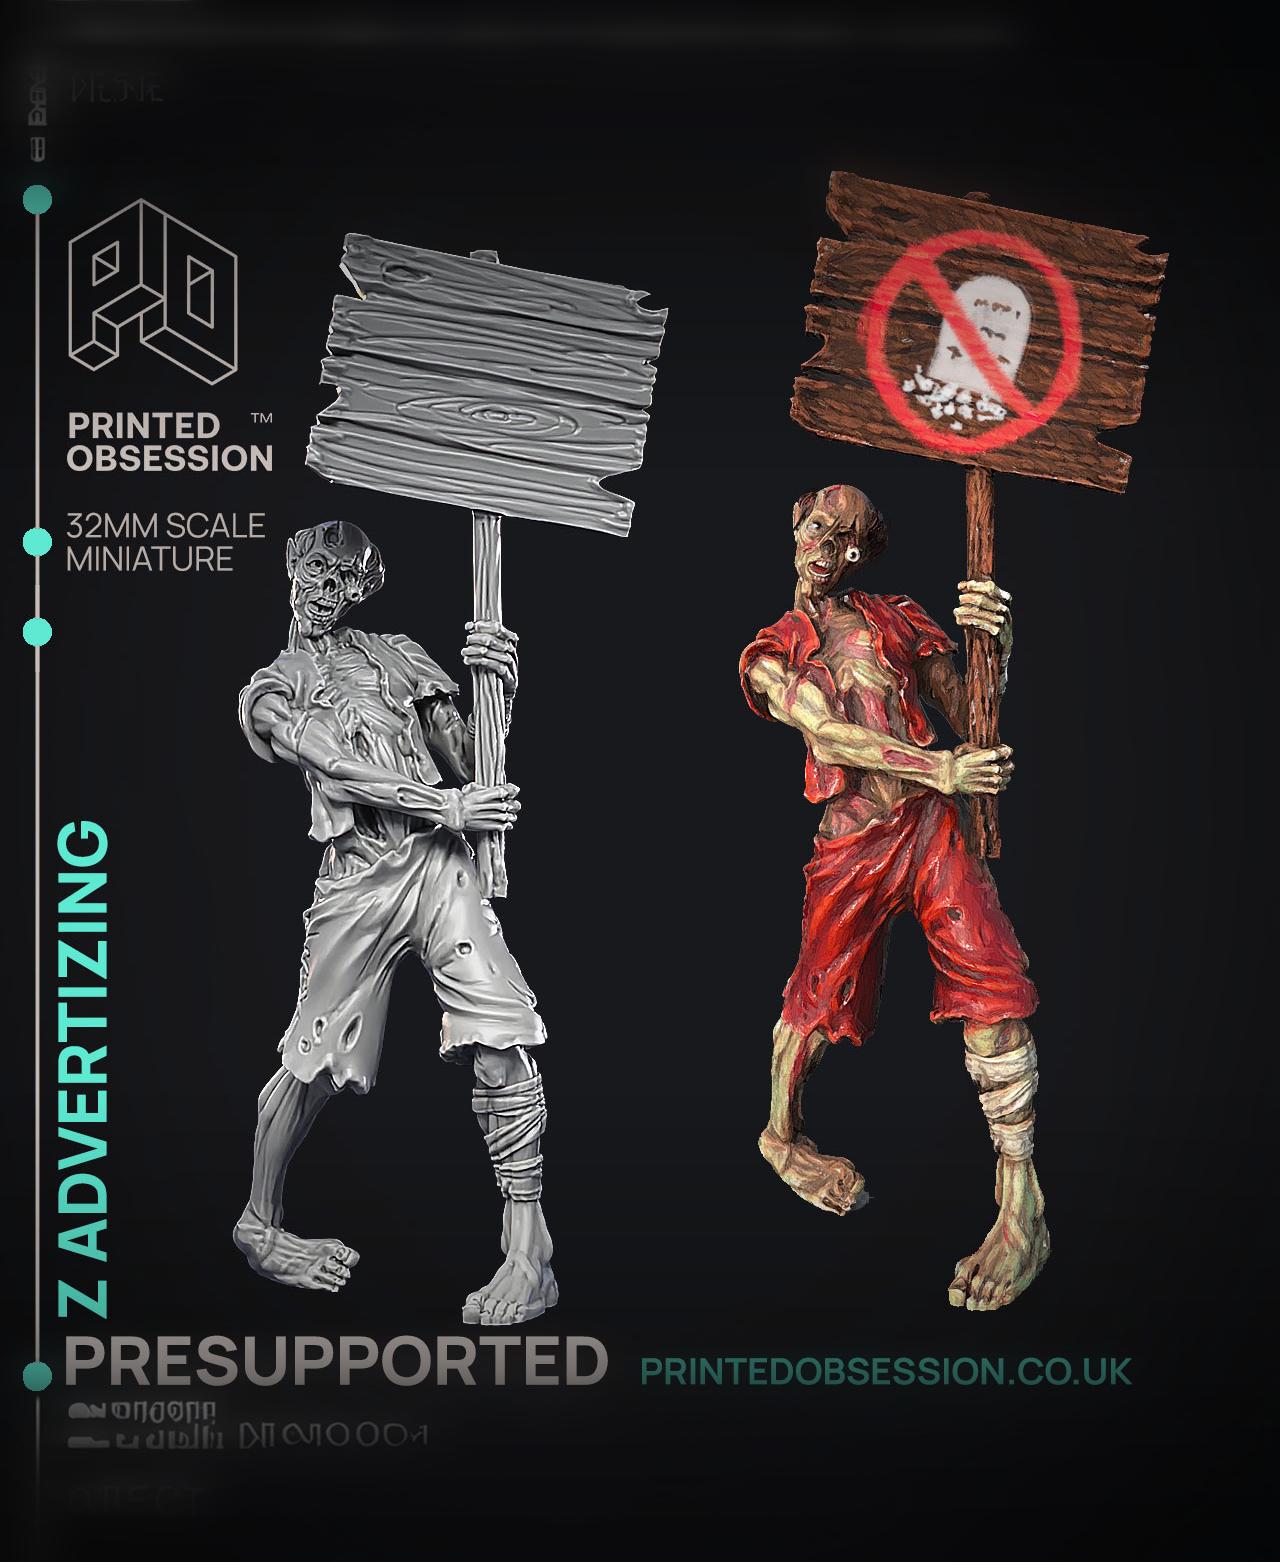 ombie Advertising - Undead NPC - PRESUPPORTED - Illustrated and Stats - 32mm scale 3d model